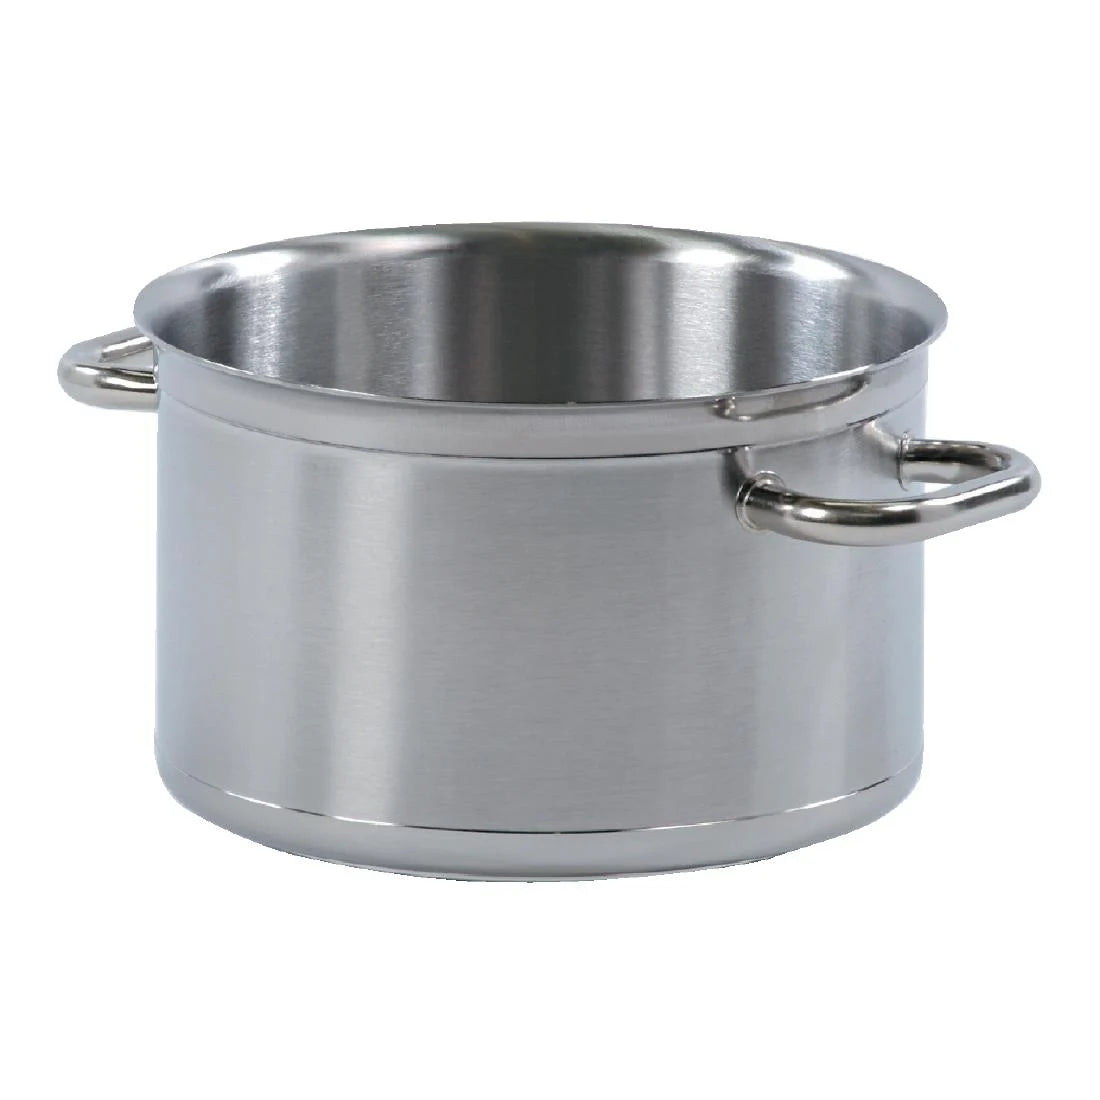 Bourgeat Tradition Plus Boiling Pan 11Ltr JD Catering Equipment Solutions Ltd